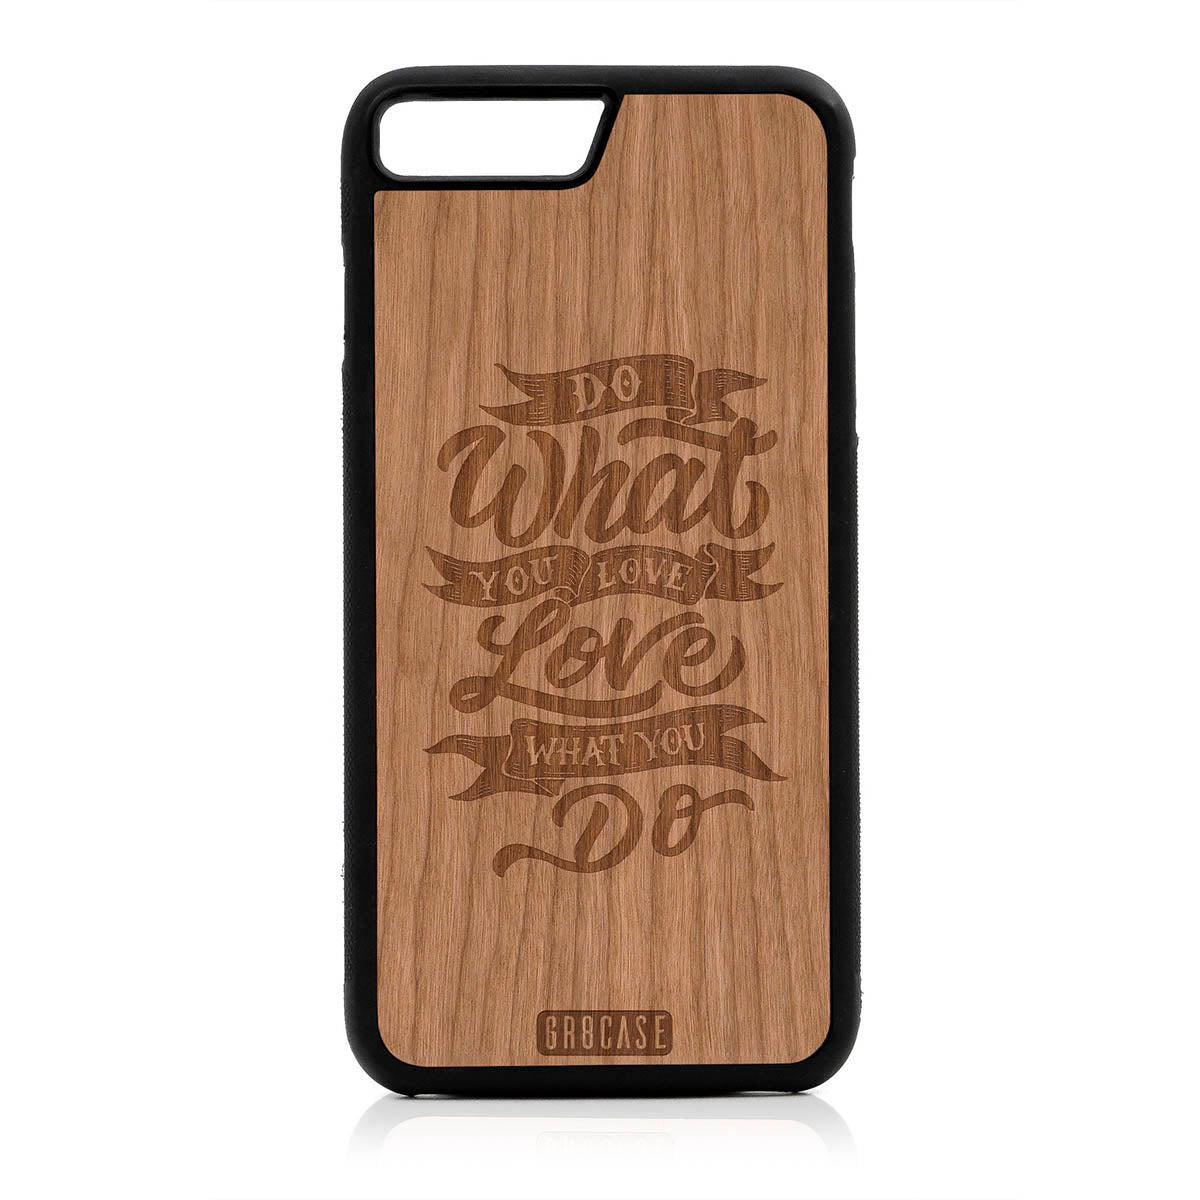 Do What You Love Love What You Do Design Wood Case For iPhone 7 Plus / 8 Plus by GR8CASE